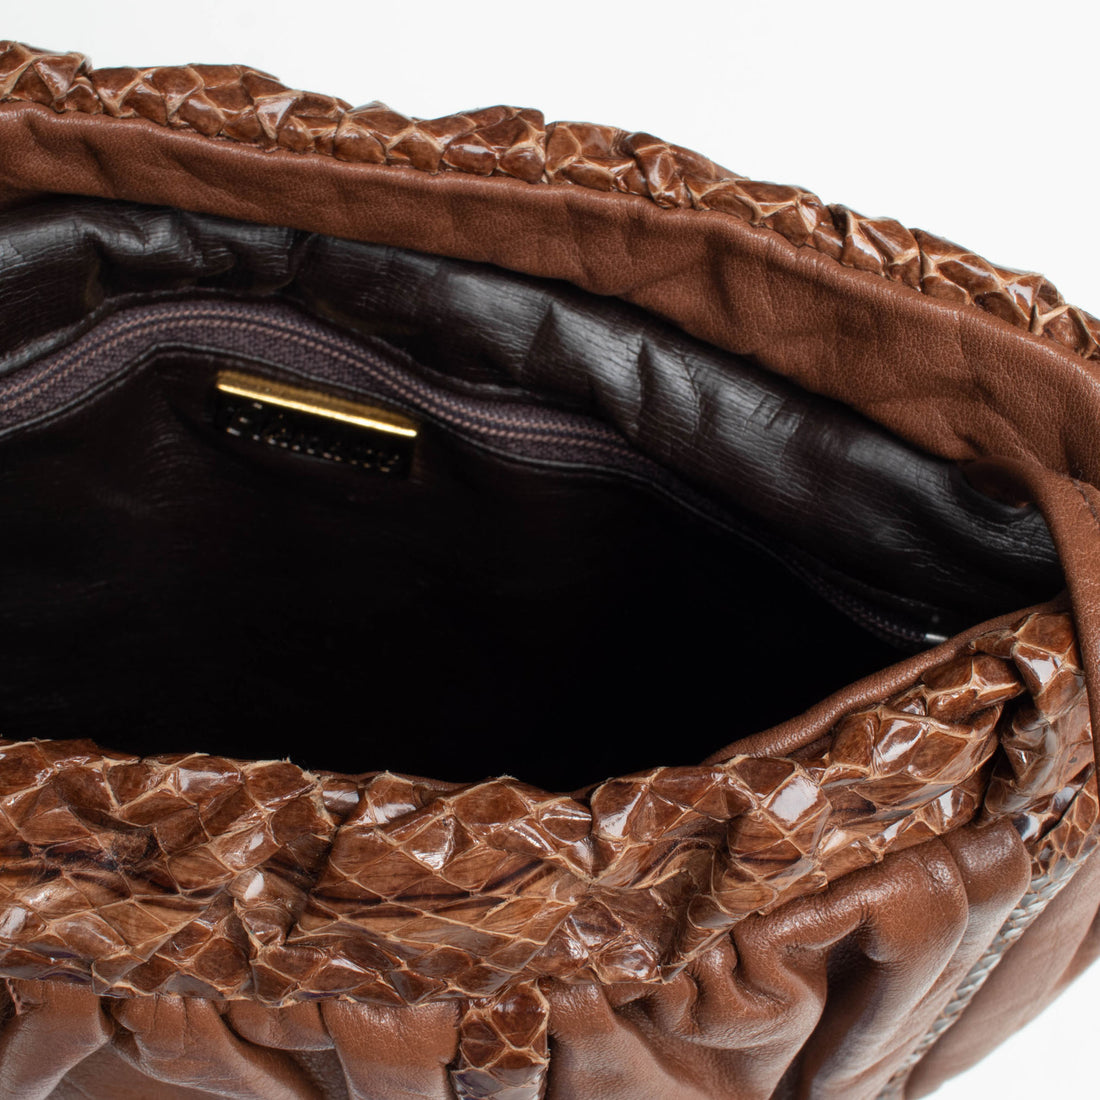 Brown Leather Purse